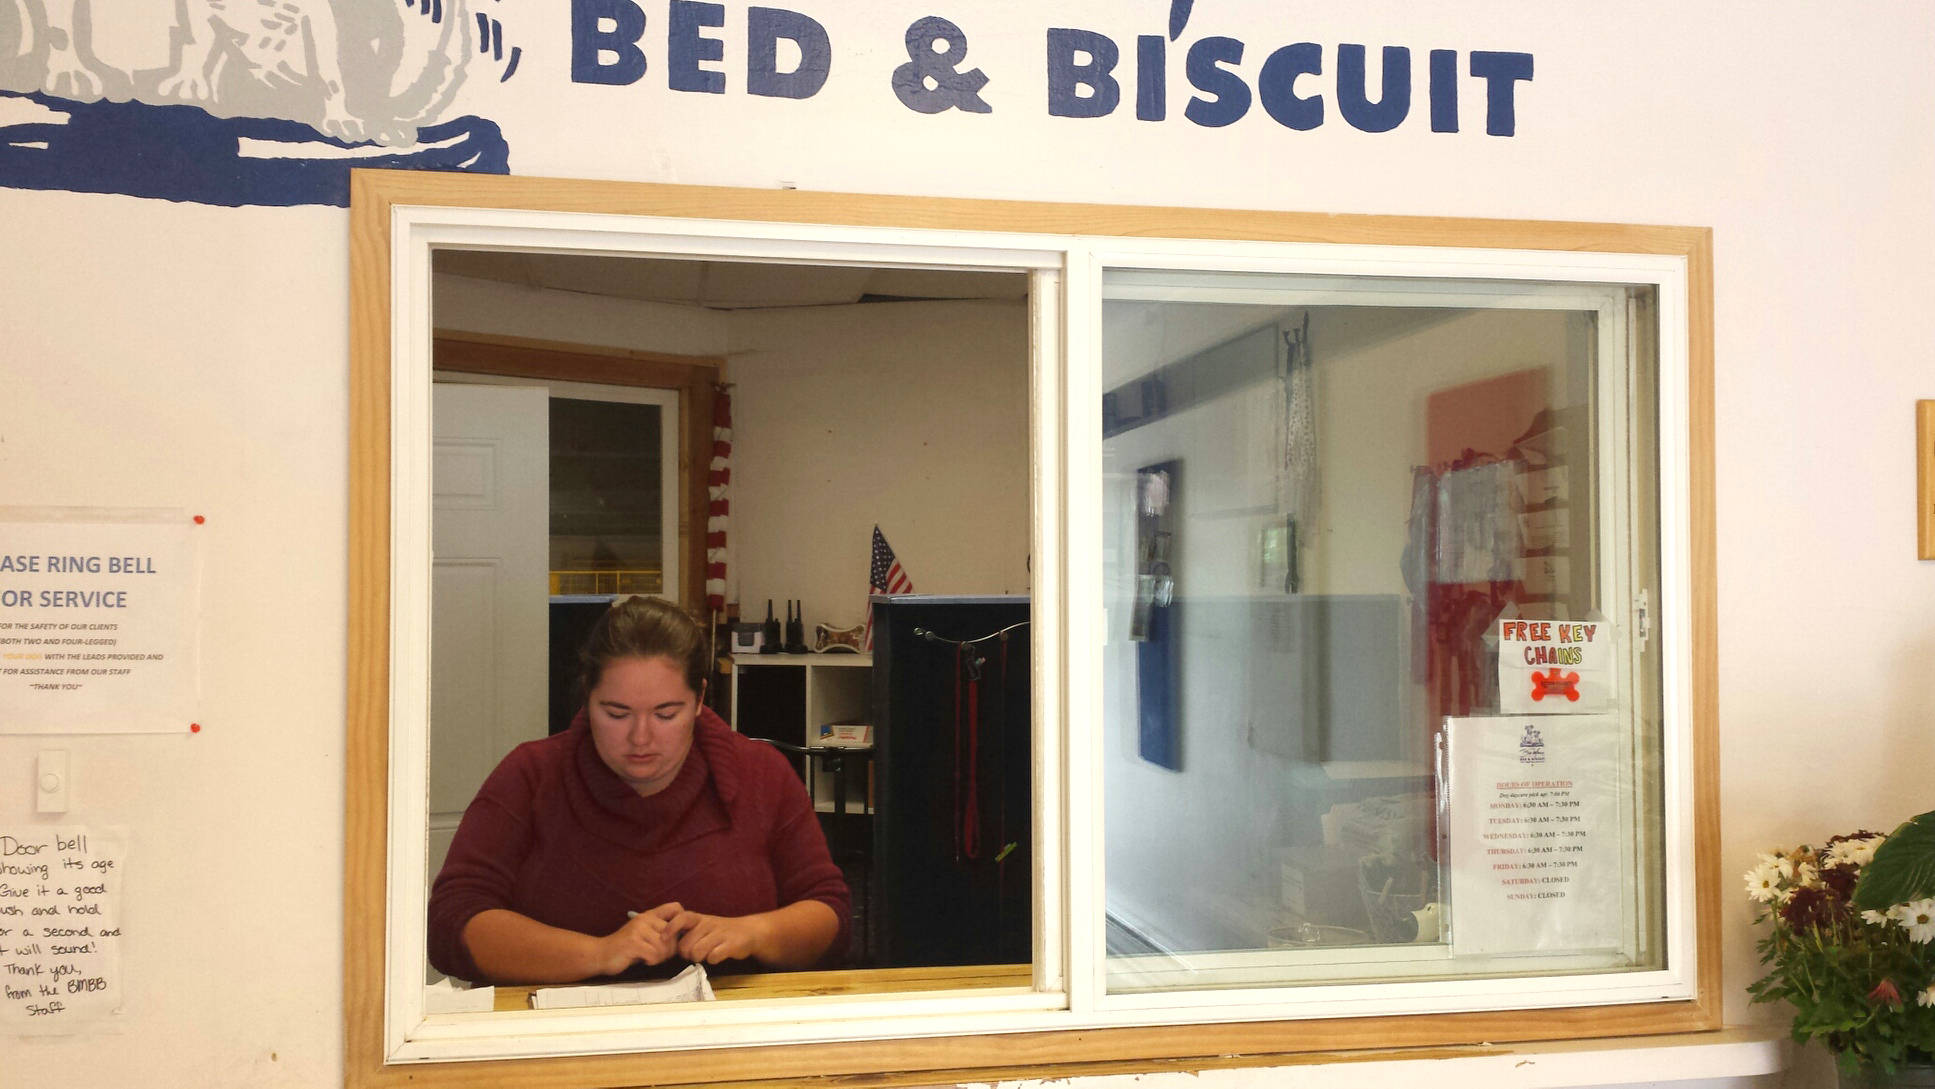 Kendra Stevenson, a Connections homeschool student, works at the front desk of the Blue Moose Bed and Biscuit this summer in Soldotna, Alaska. Stevenson was one of six students that participated in a summer work program through Peninsula Community Health Services for high school students with disabilities to gain work experience. (Photo courtesy Margaret Mercer)